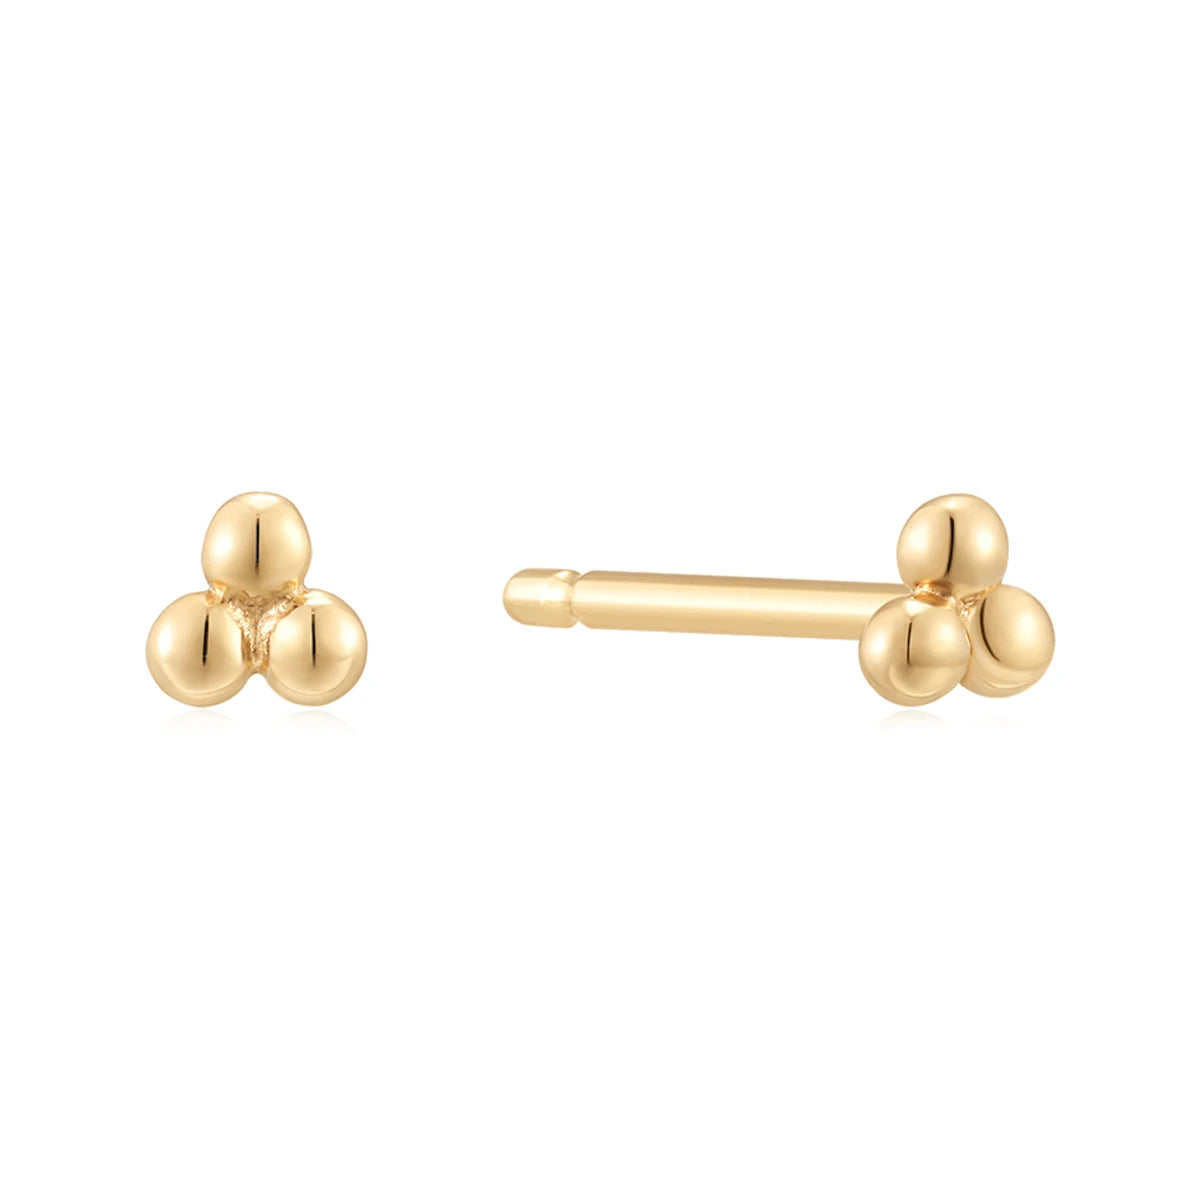 14K gold tragus earrings with three dots cartilage earrings helix earrings conch piercings gold tragus stud